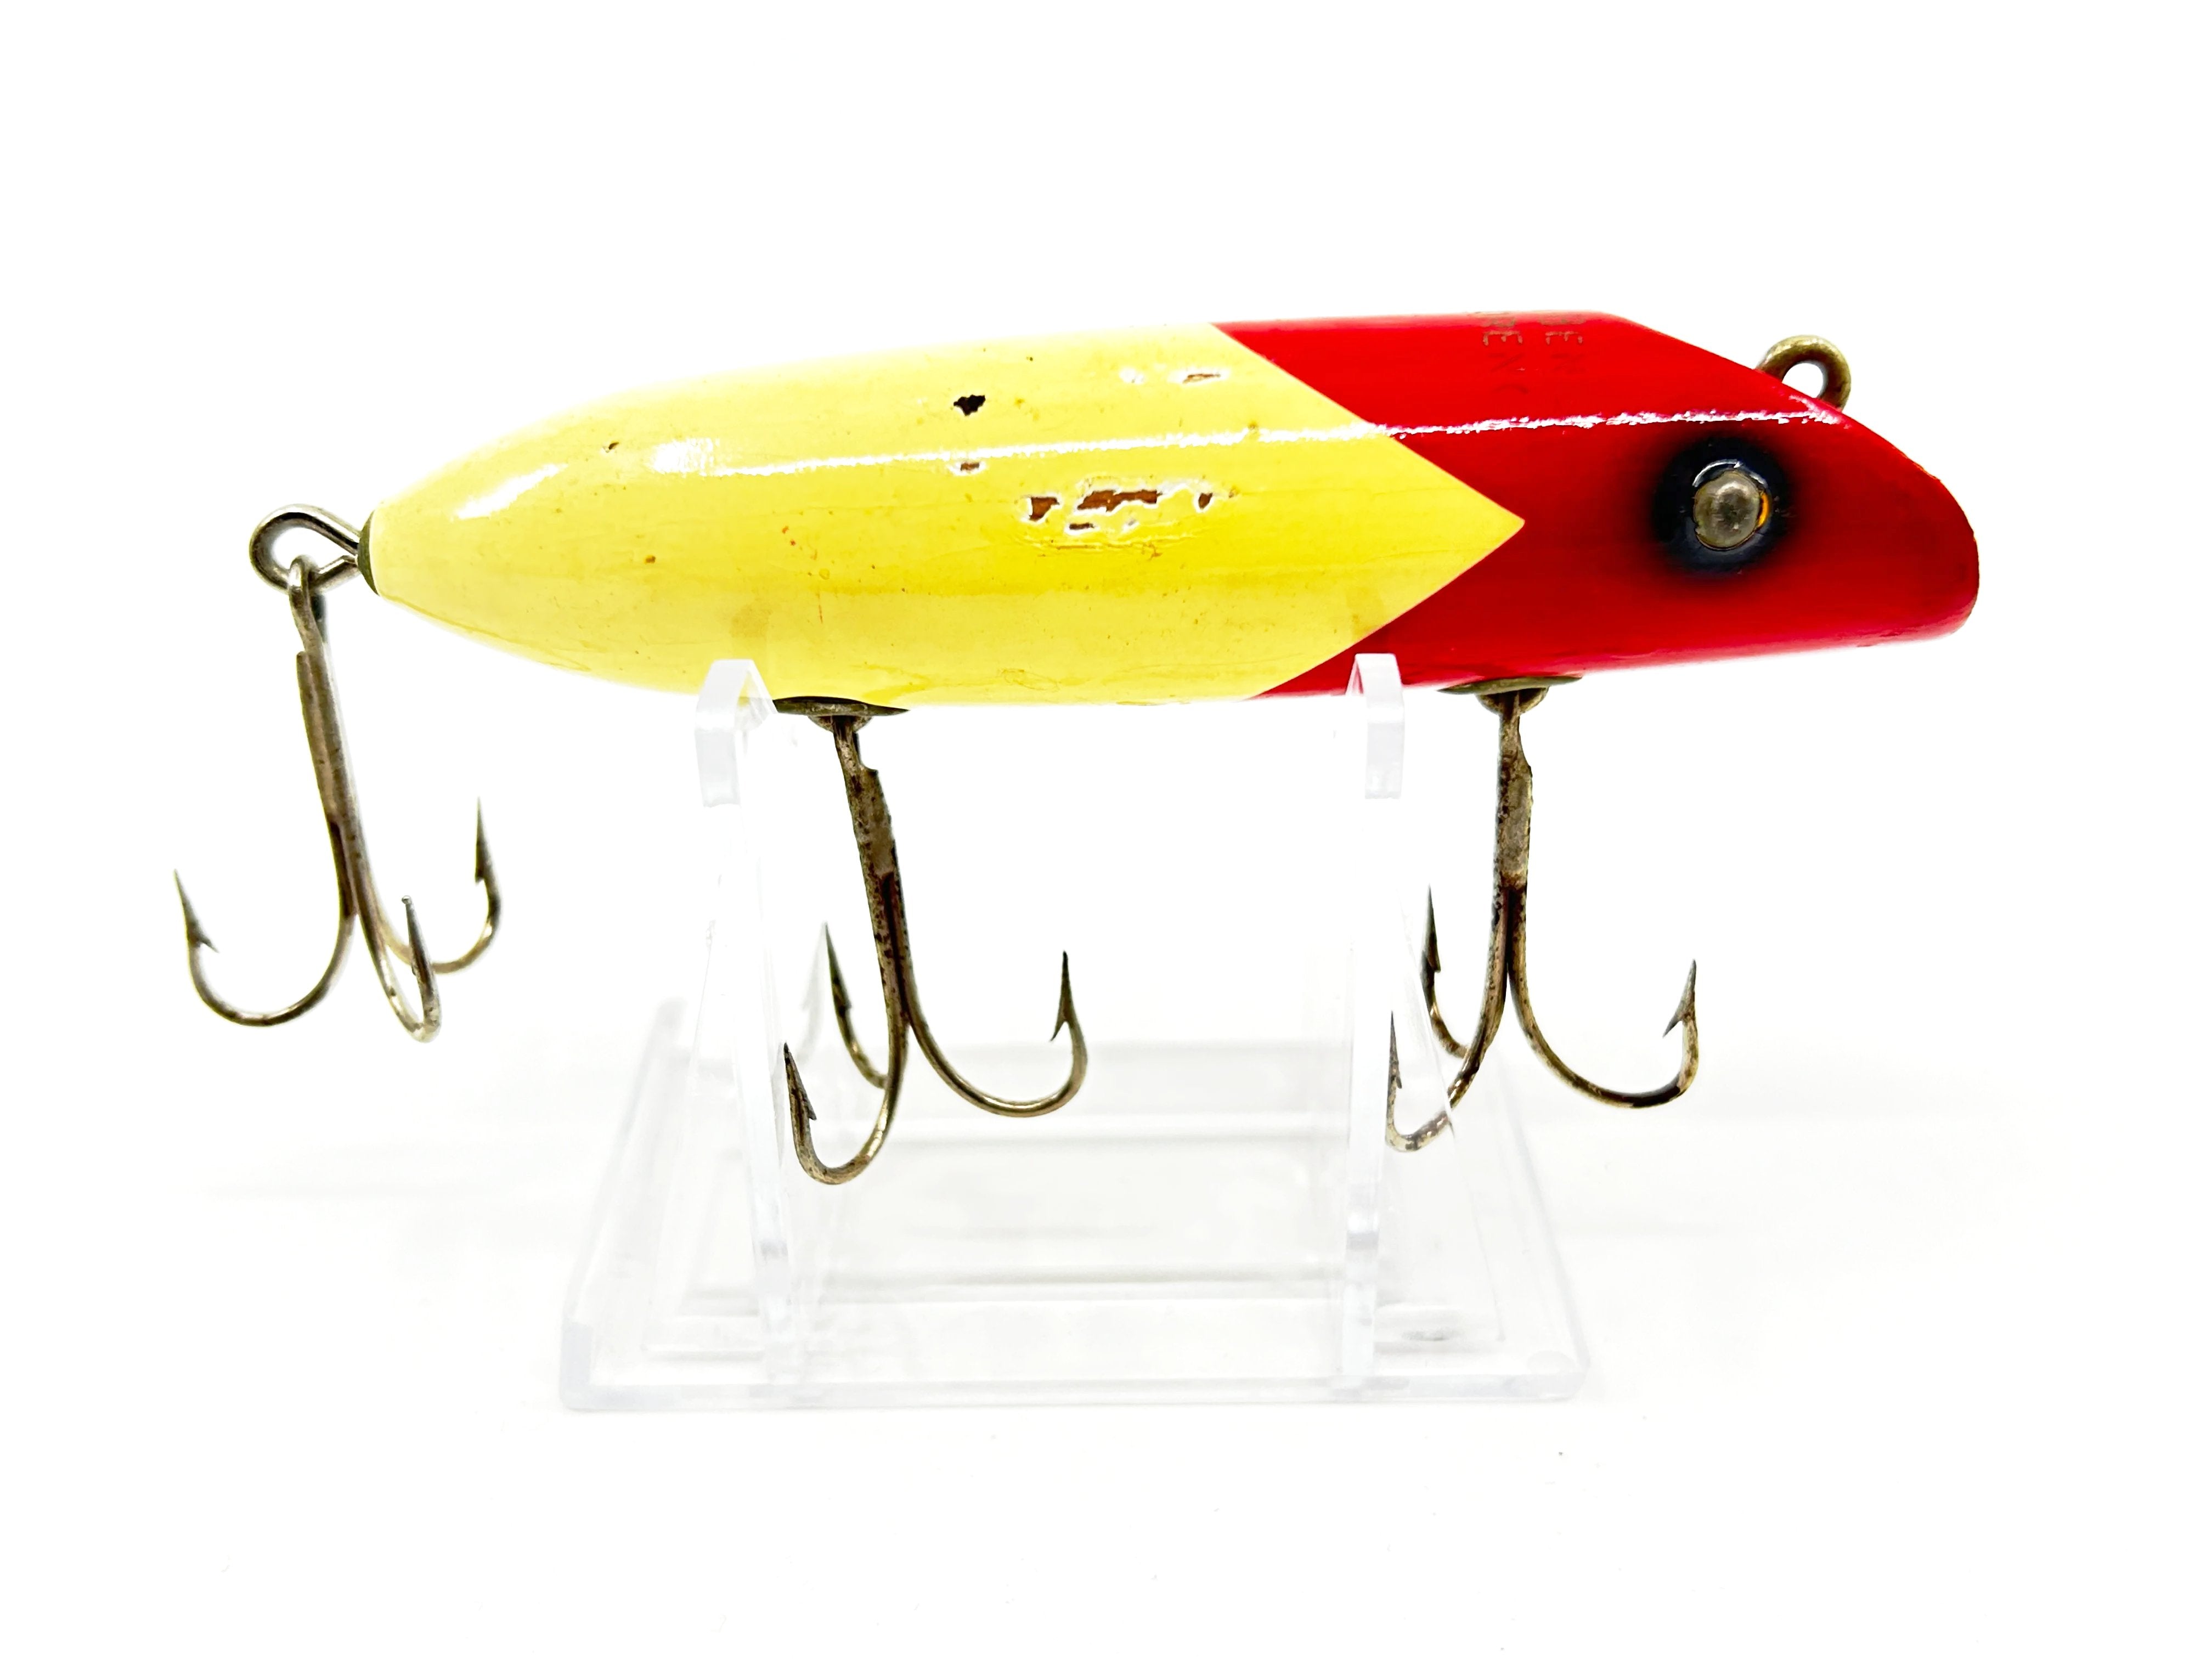 South Bend Original Bass-Oreno, Red and White Color – My Bait Shop, LLC